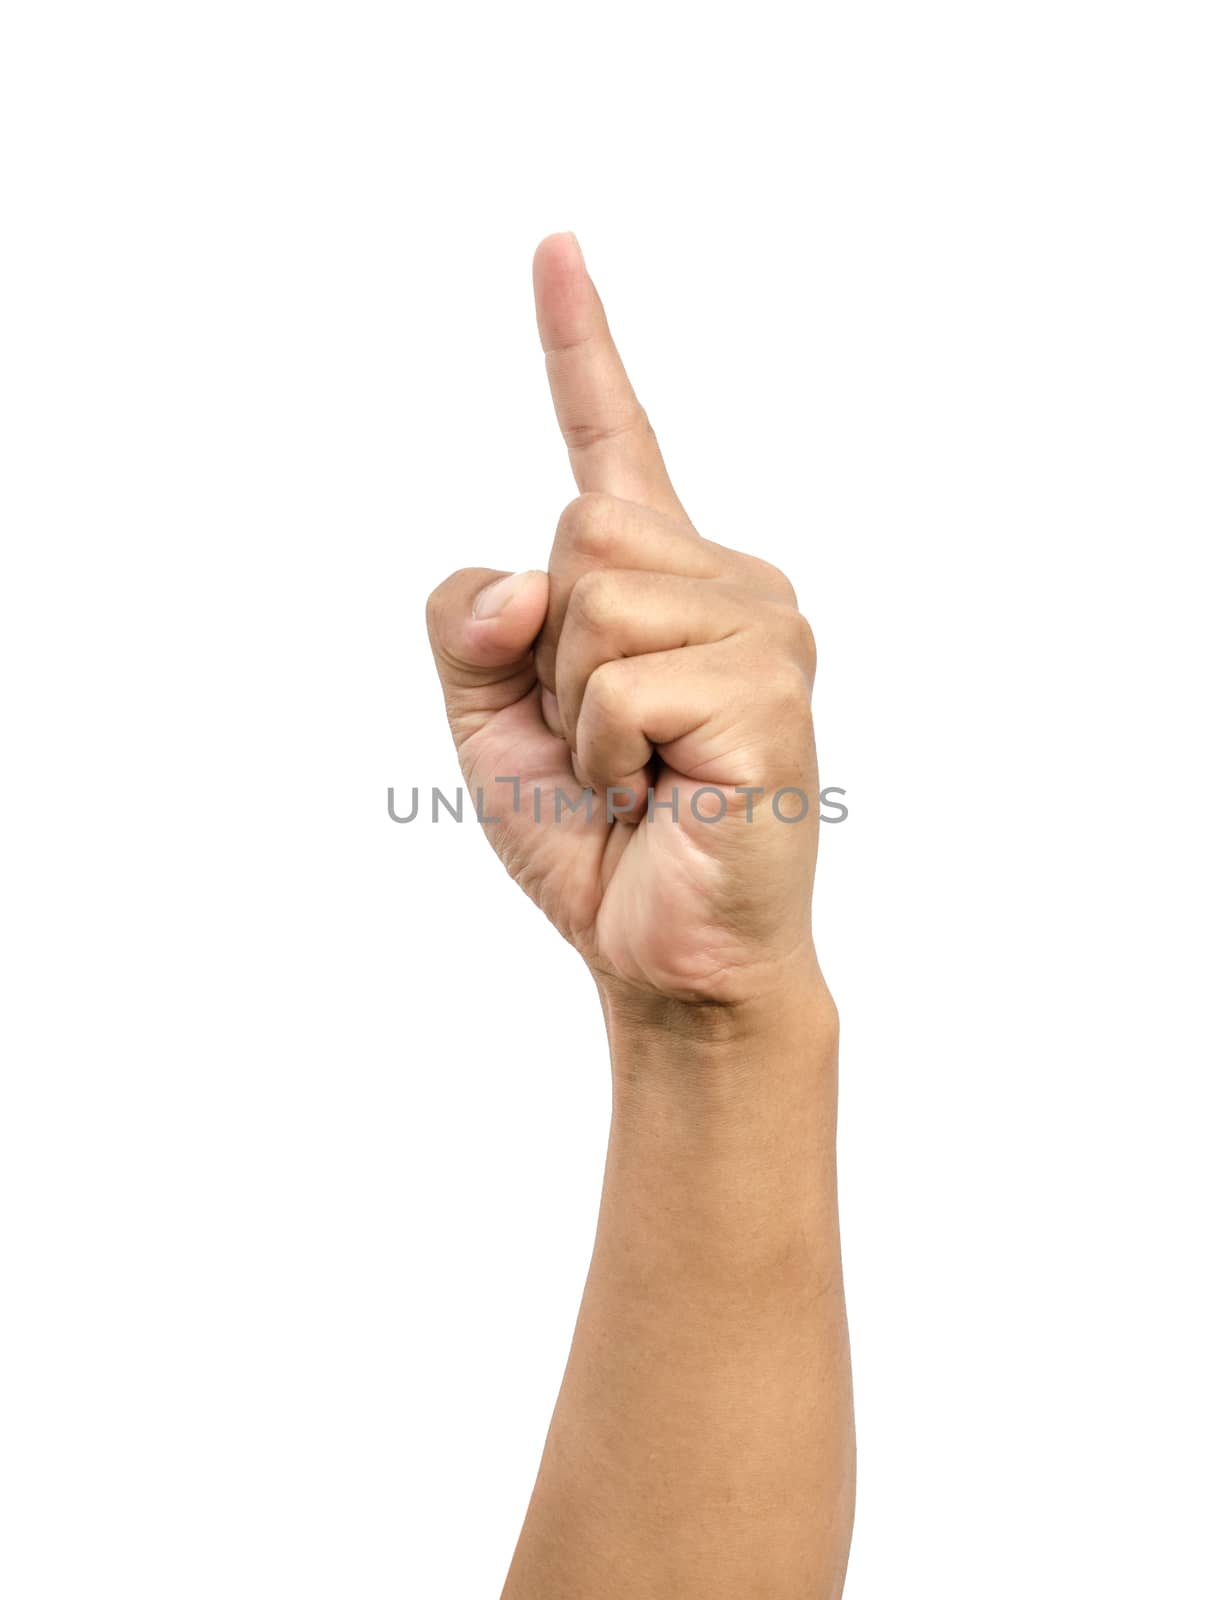 Hand gesture pointing finger on a white background. by photobyphotoboy